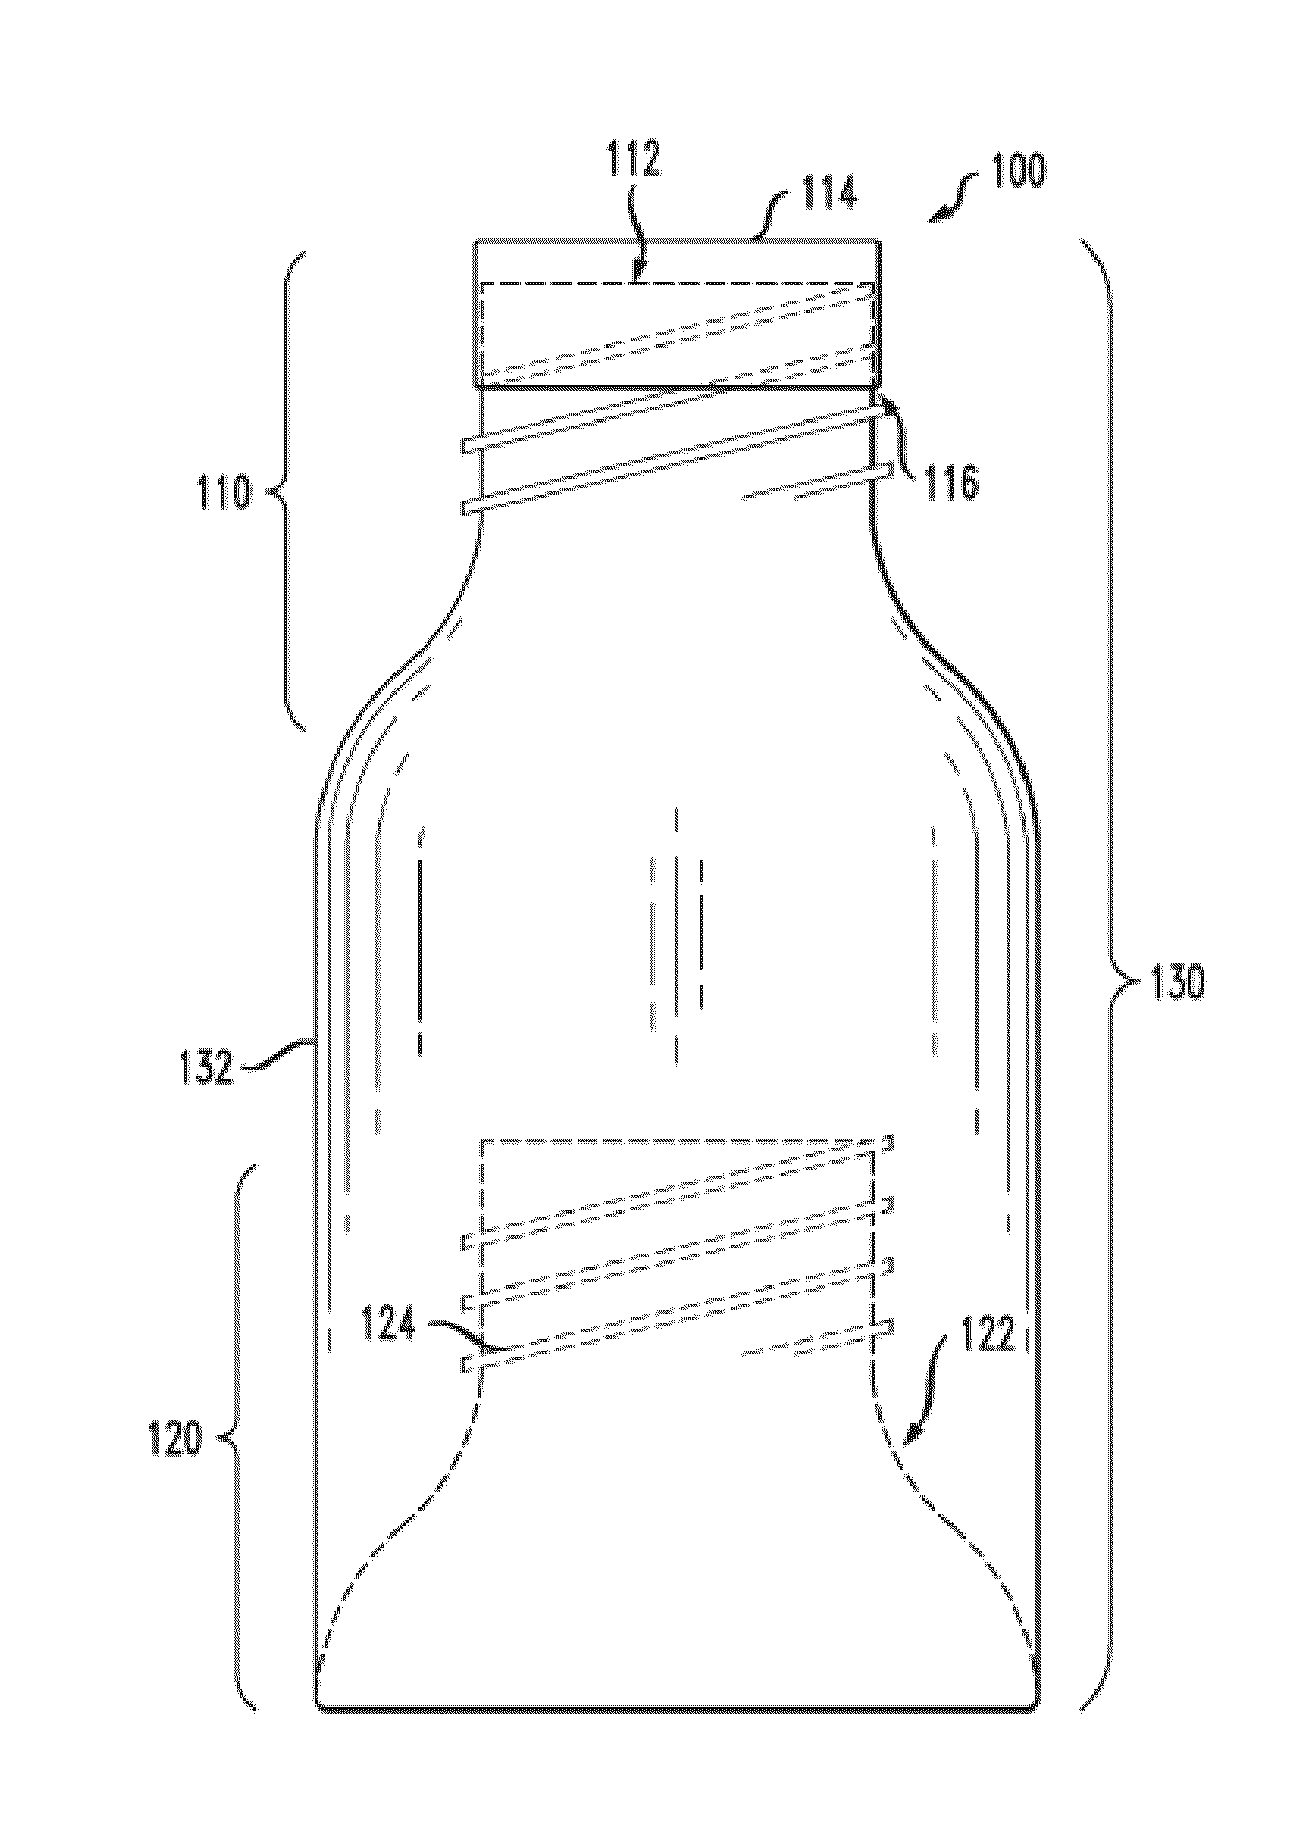 Nestable beverage containers and methods thereof